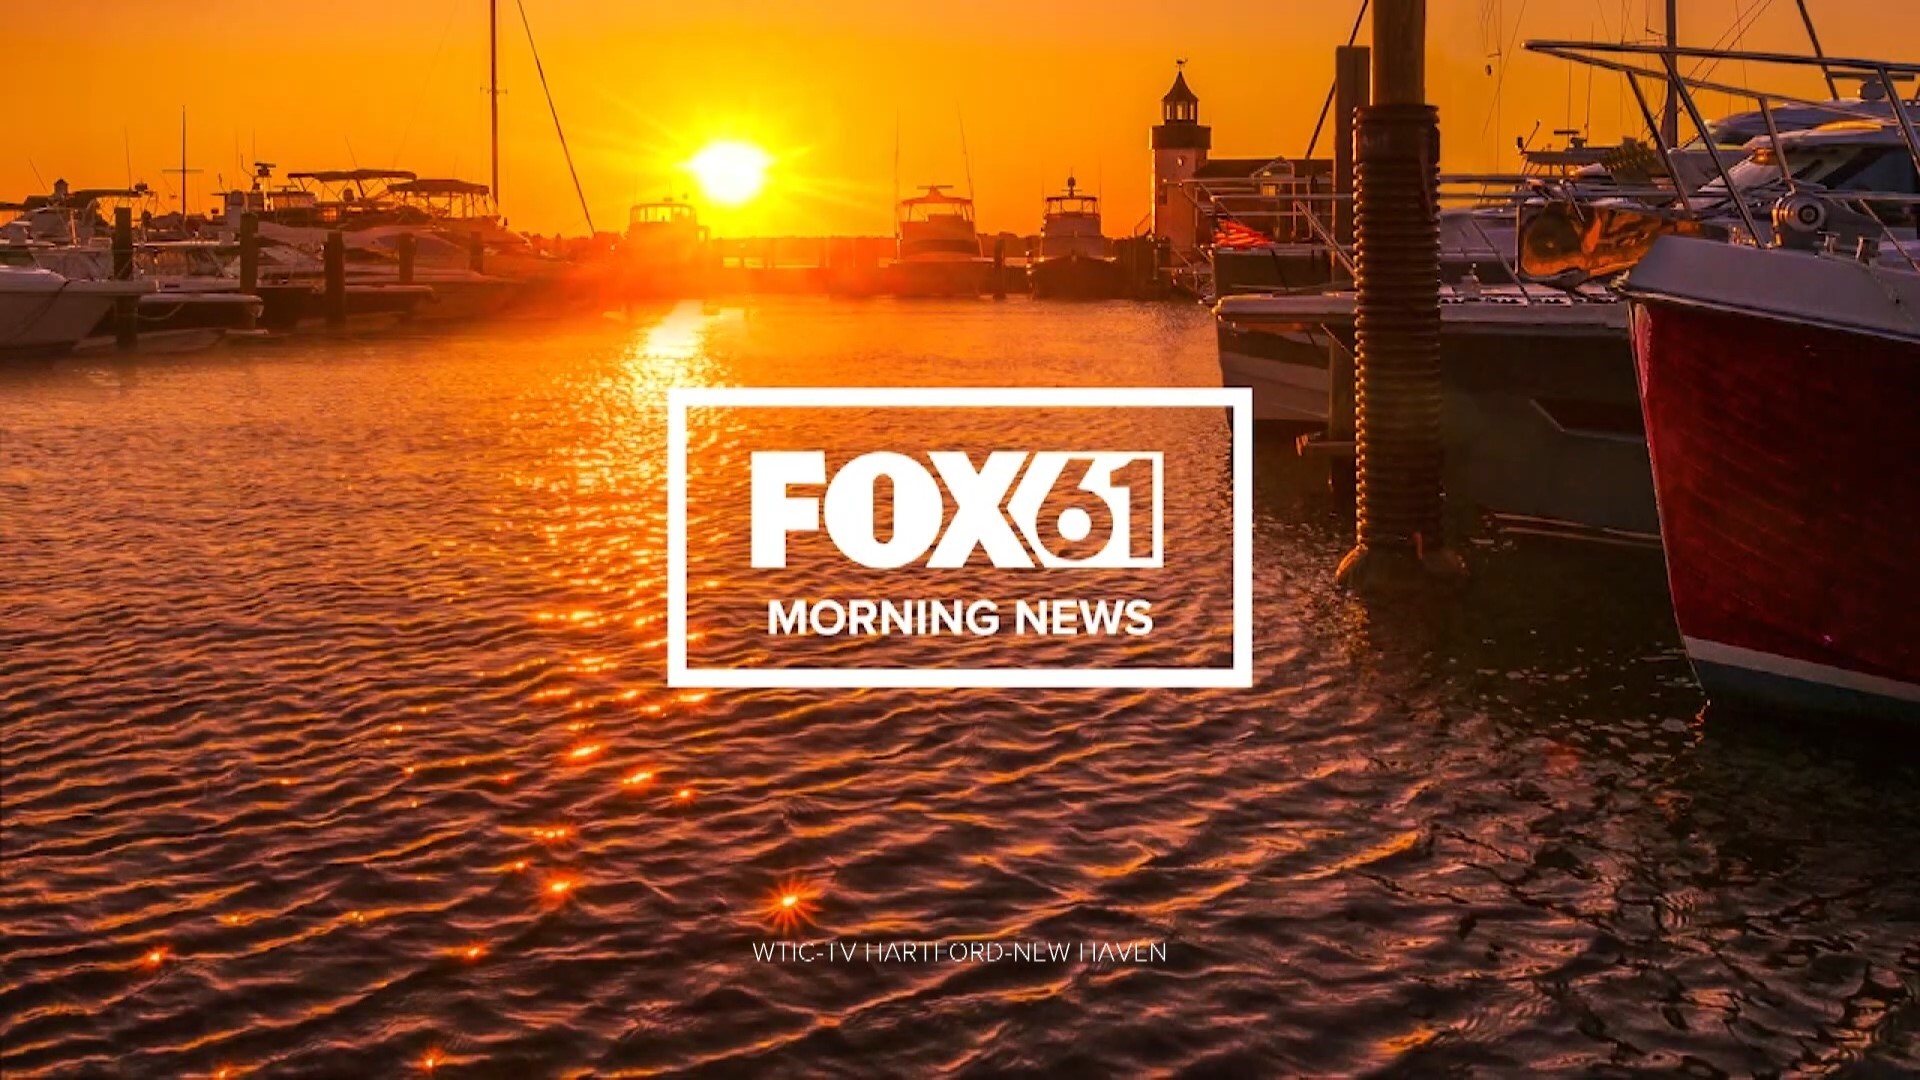 Here are the top stories for the morning of August 10 in Connecticut.